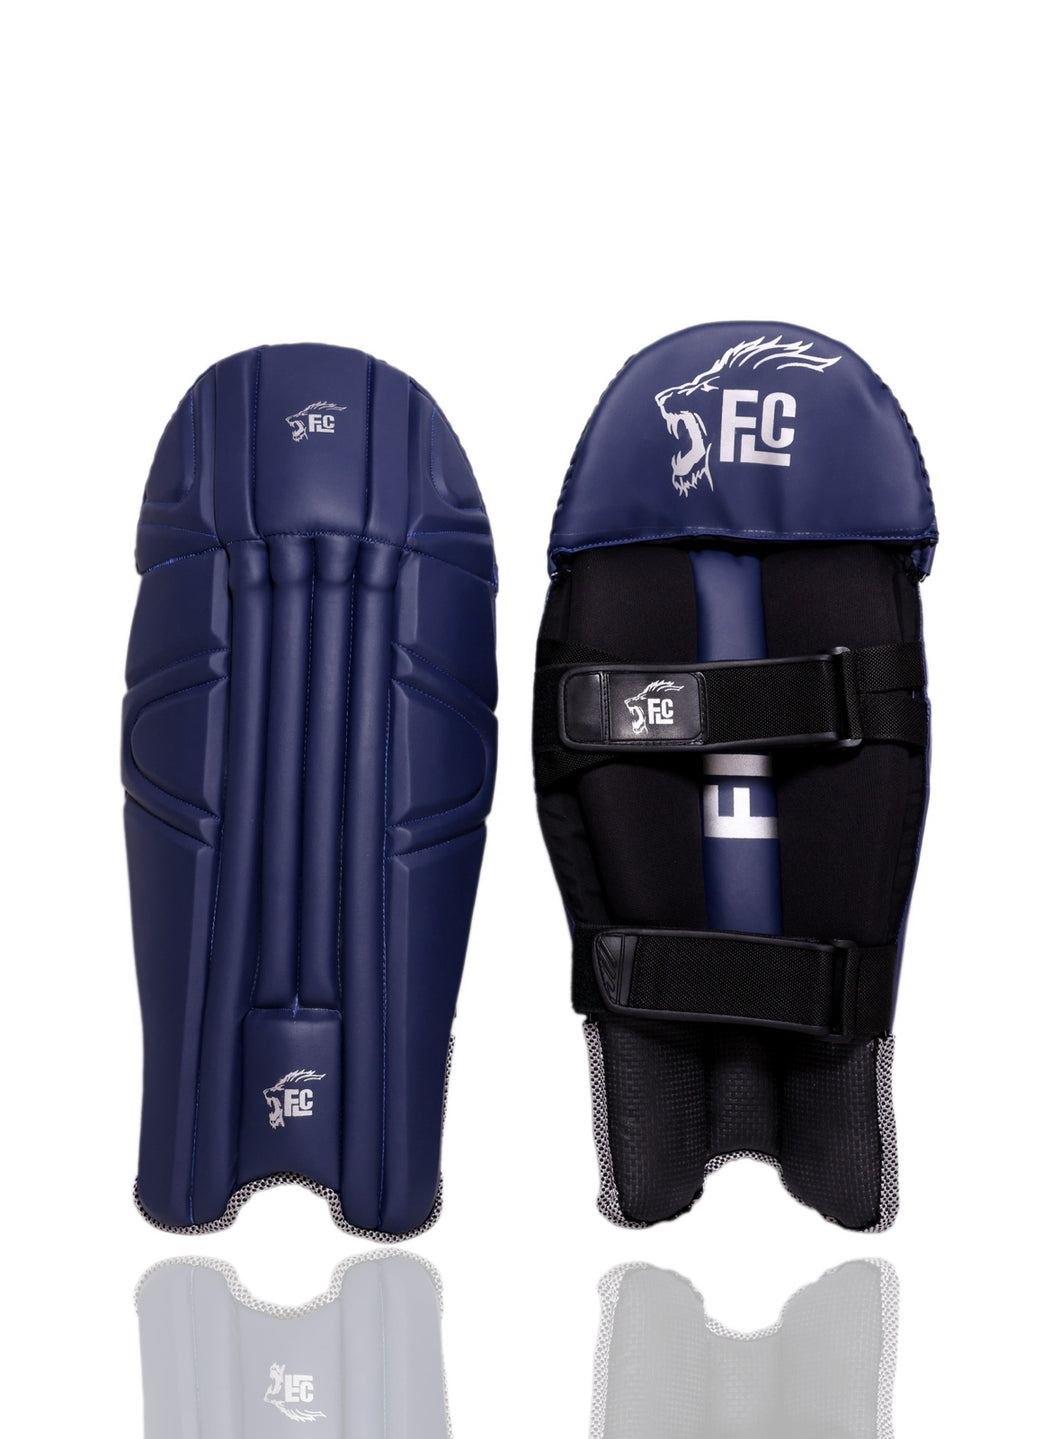 Limited Edition Wicket Keeping Pads - Navy